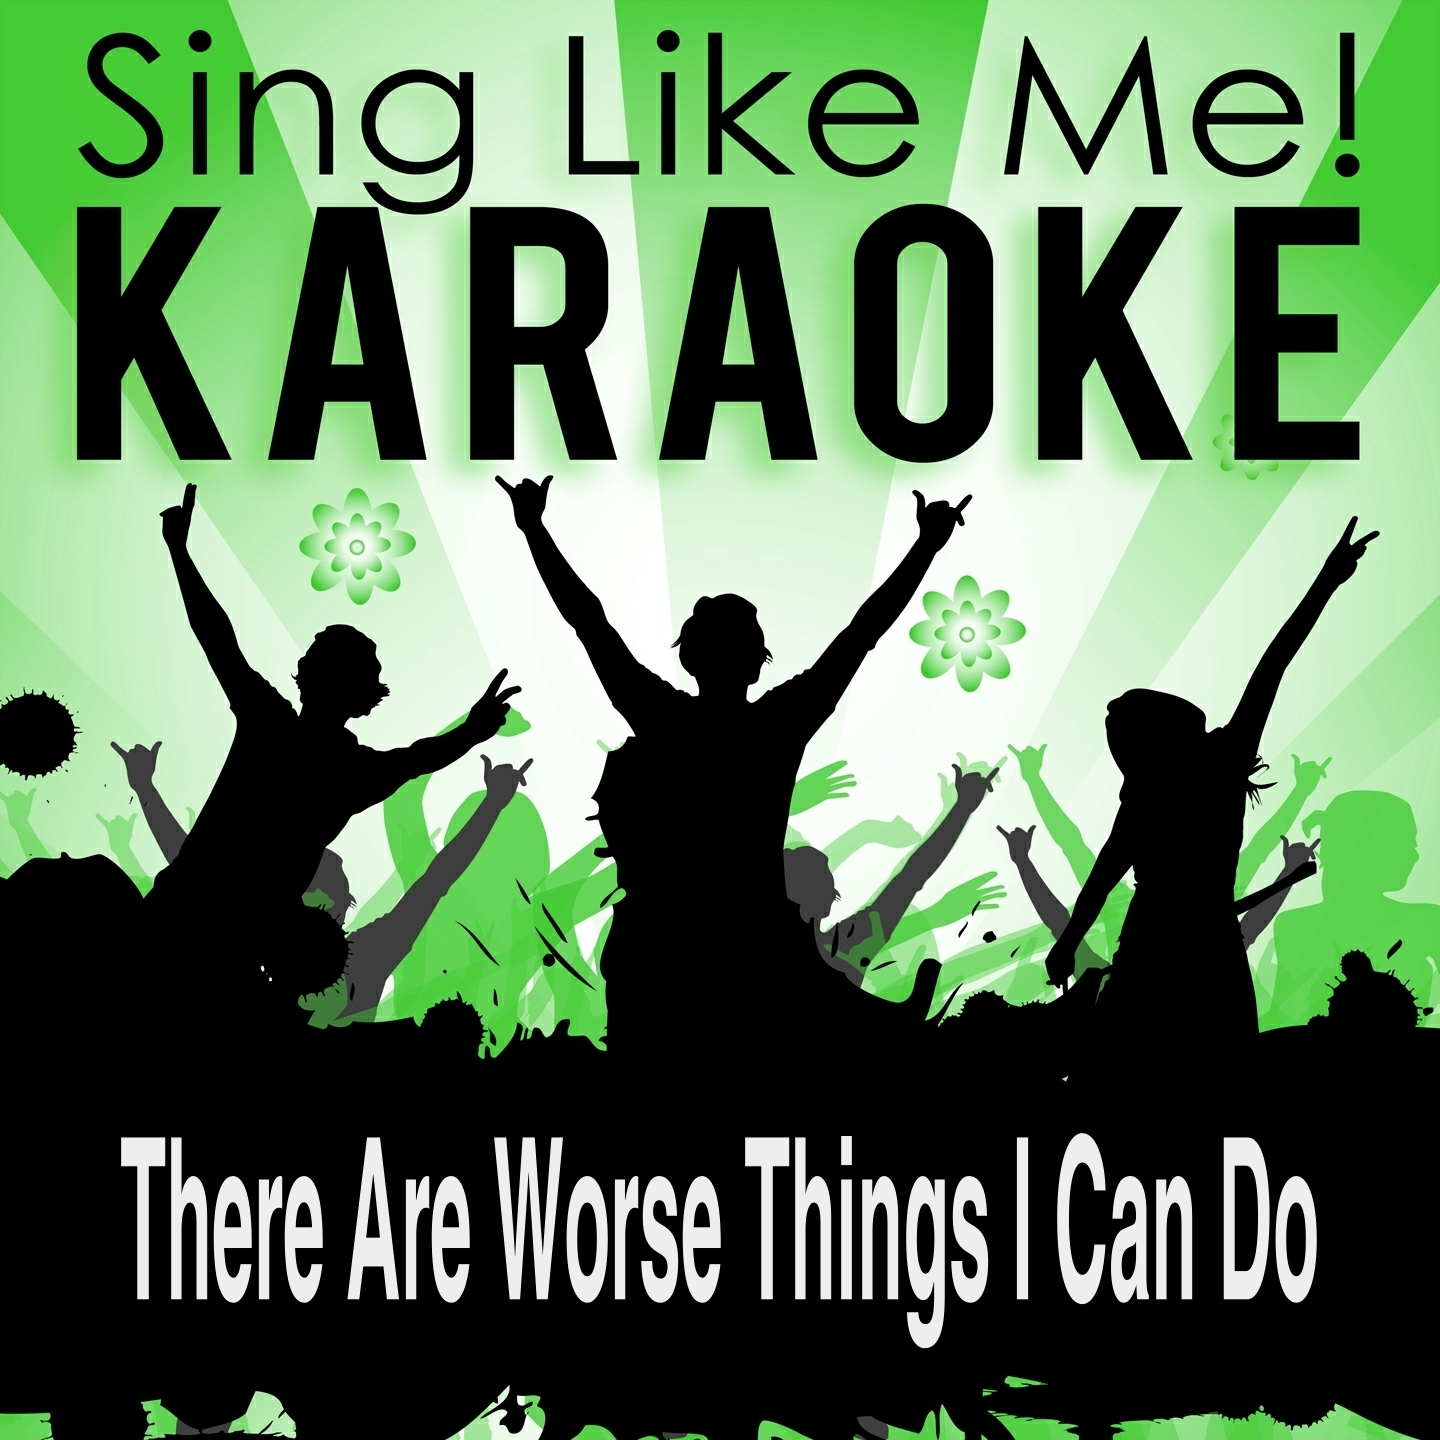 There Are Worse Things I Can Do (From the Musical "Grease") [Karaoke Version with Guide Melody] (Originally Performed By Original Broadway Cast of "Grease")